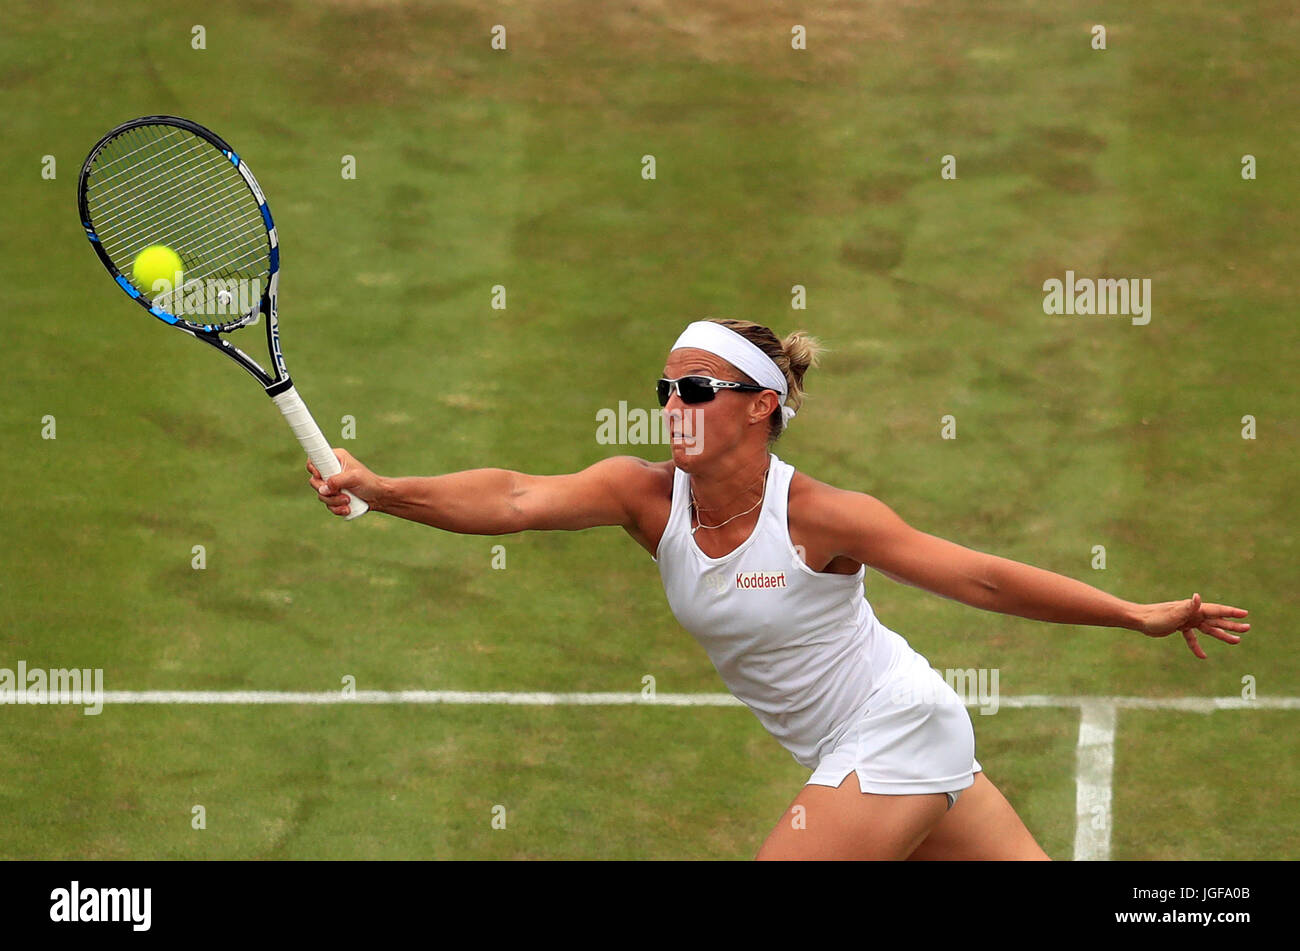 Kirsten Flipkens in action against Angelique Kerber on day four of the Wimbledon Championships at The All England Lawn Tennis and Croquet Club, Wimbledon. Stock Photo